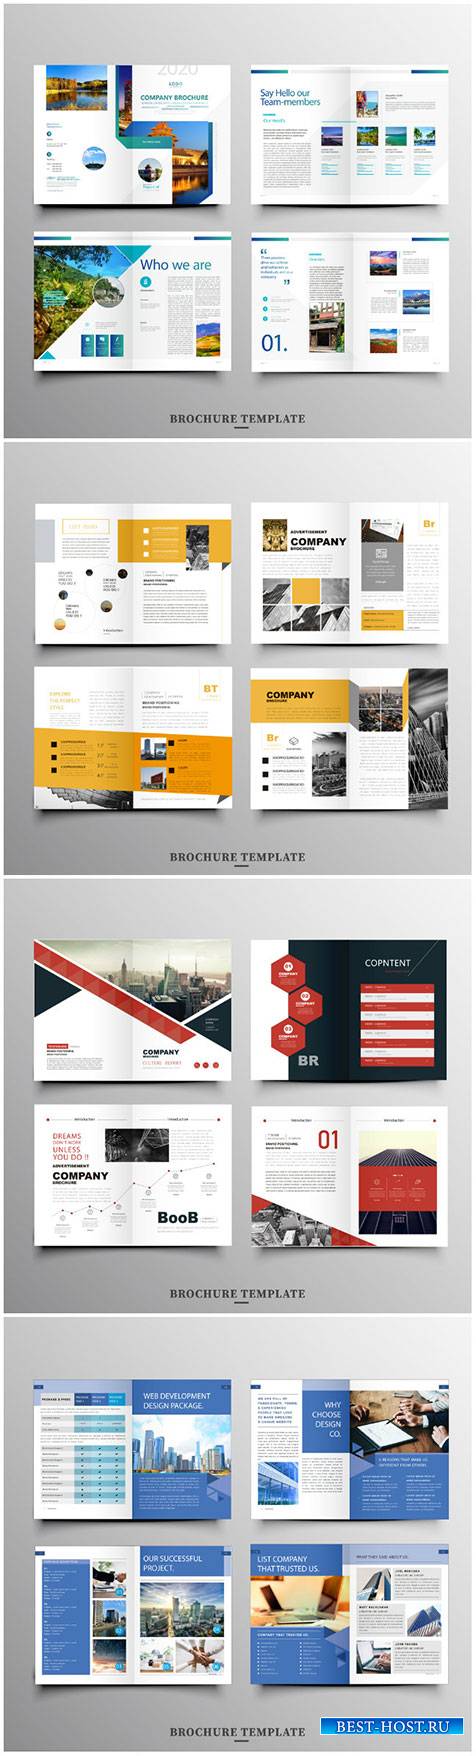 Brochure template vector layout design, corporate business annual report, magazine, flyer mockup # 244